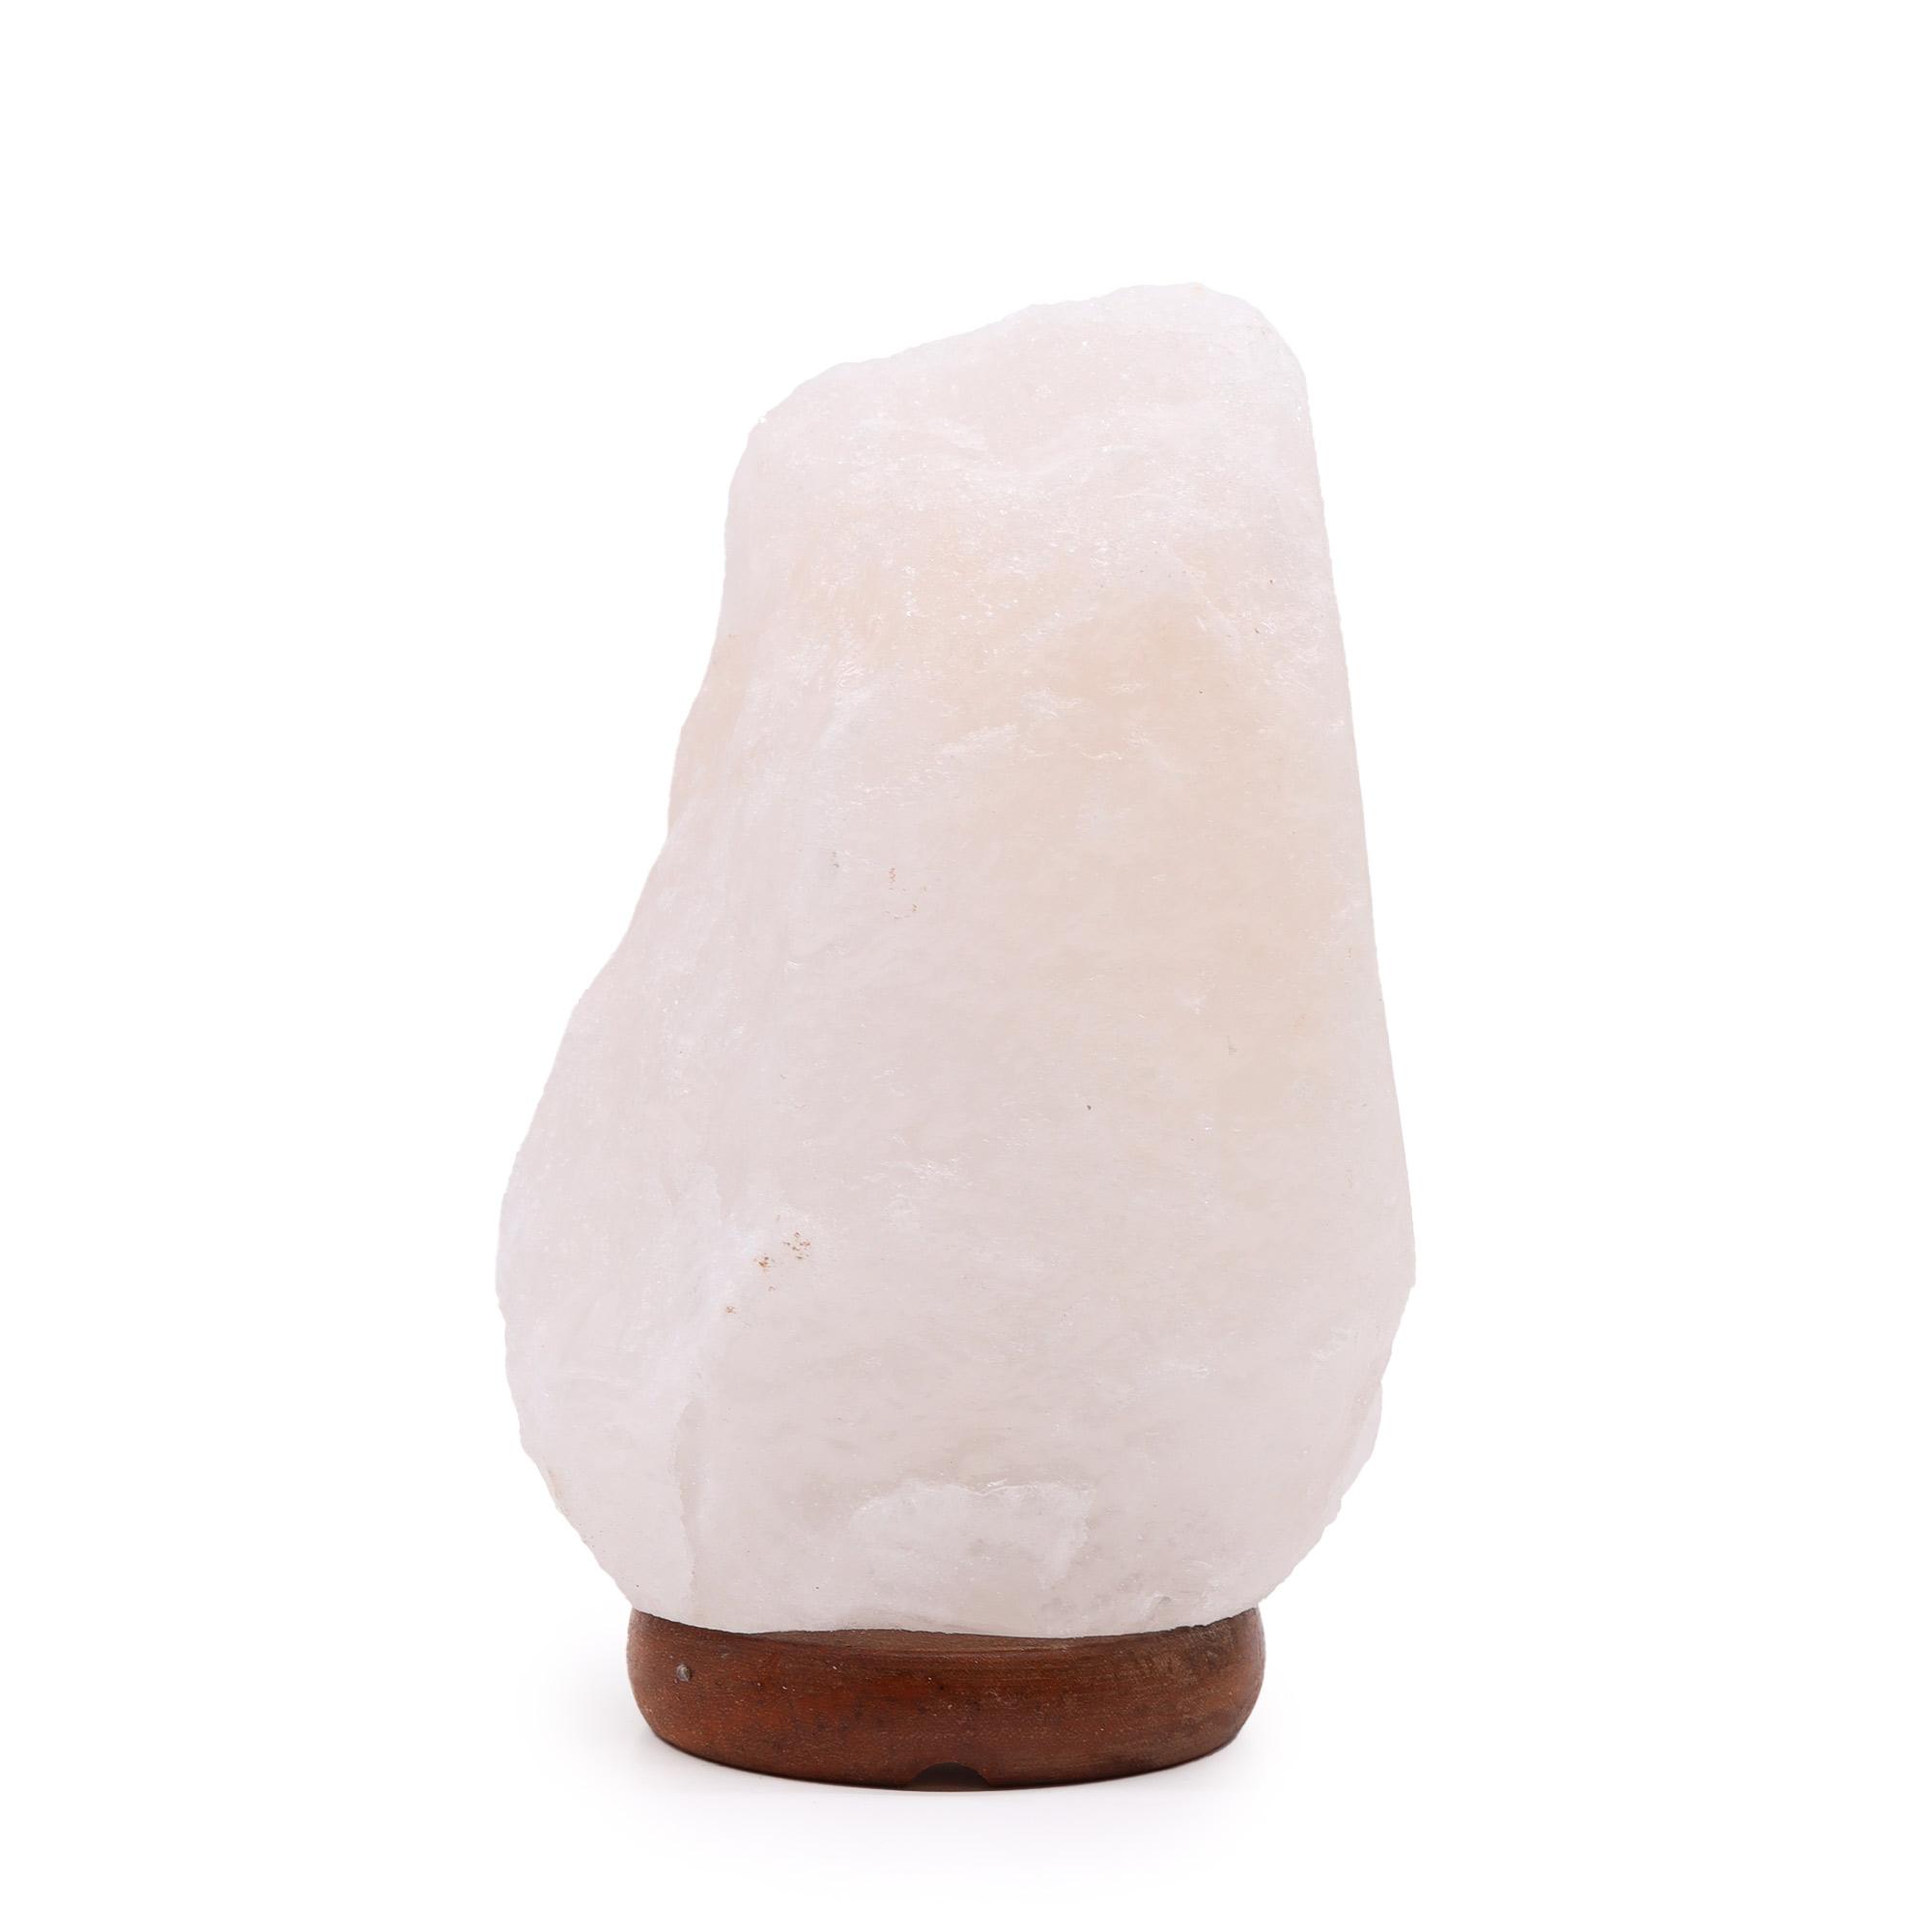 Crystal Rock Himalayan Salt Lamp with Wooden Base - 2 to 3 kg